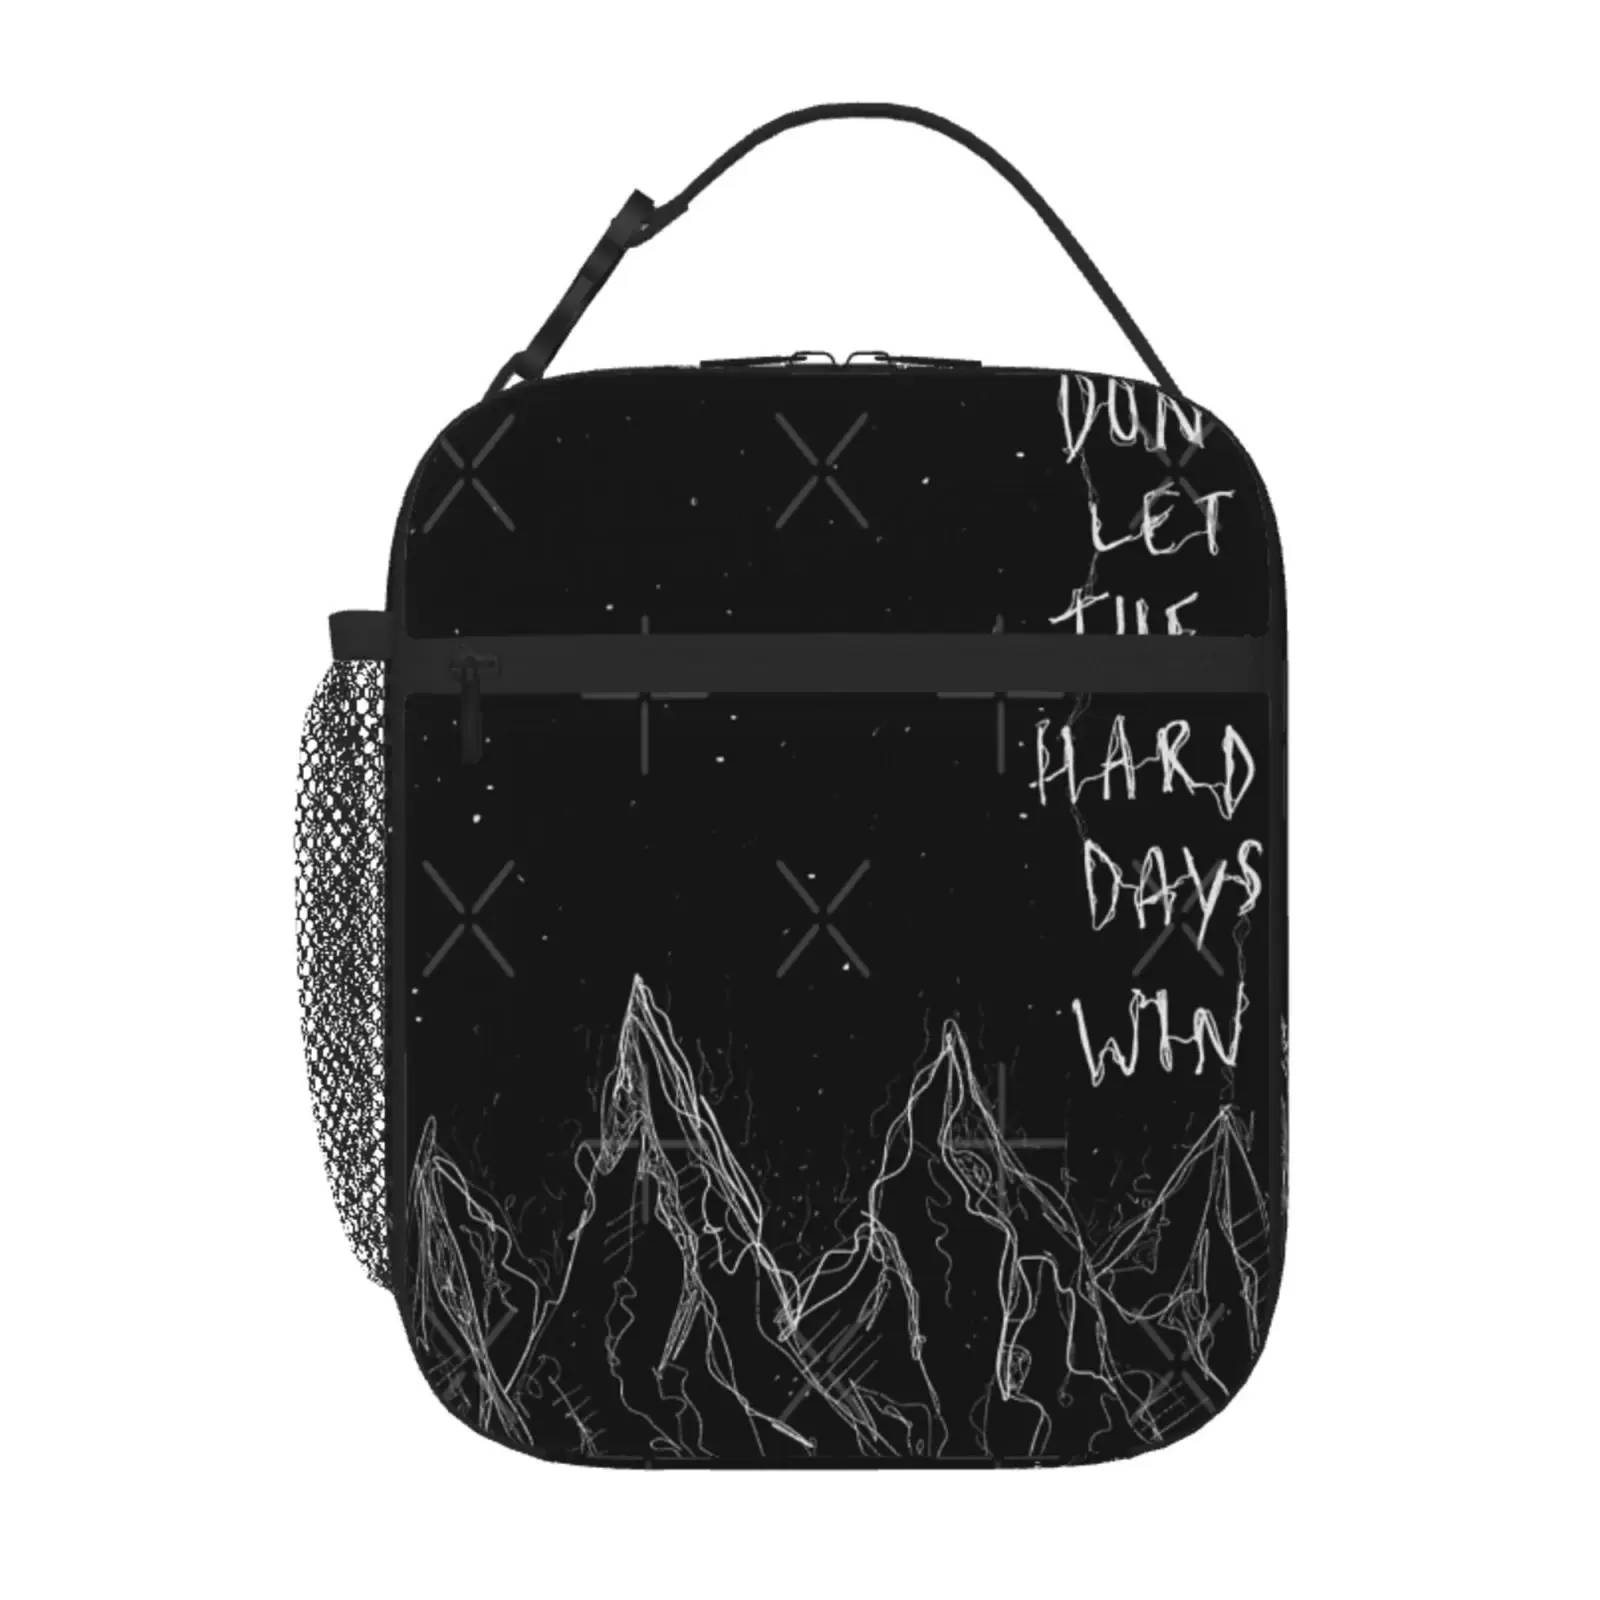 

Don’t Let The Hard Days Win Lunch Box Bag Lunch Box For Kids Lunch Box For Kids Insulated Bags Lunch Bag For Kids